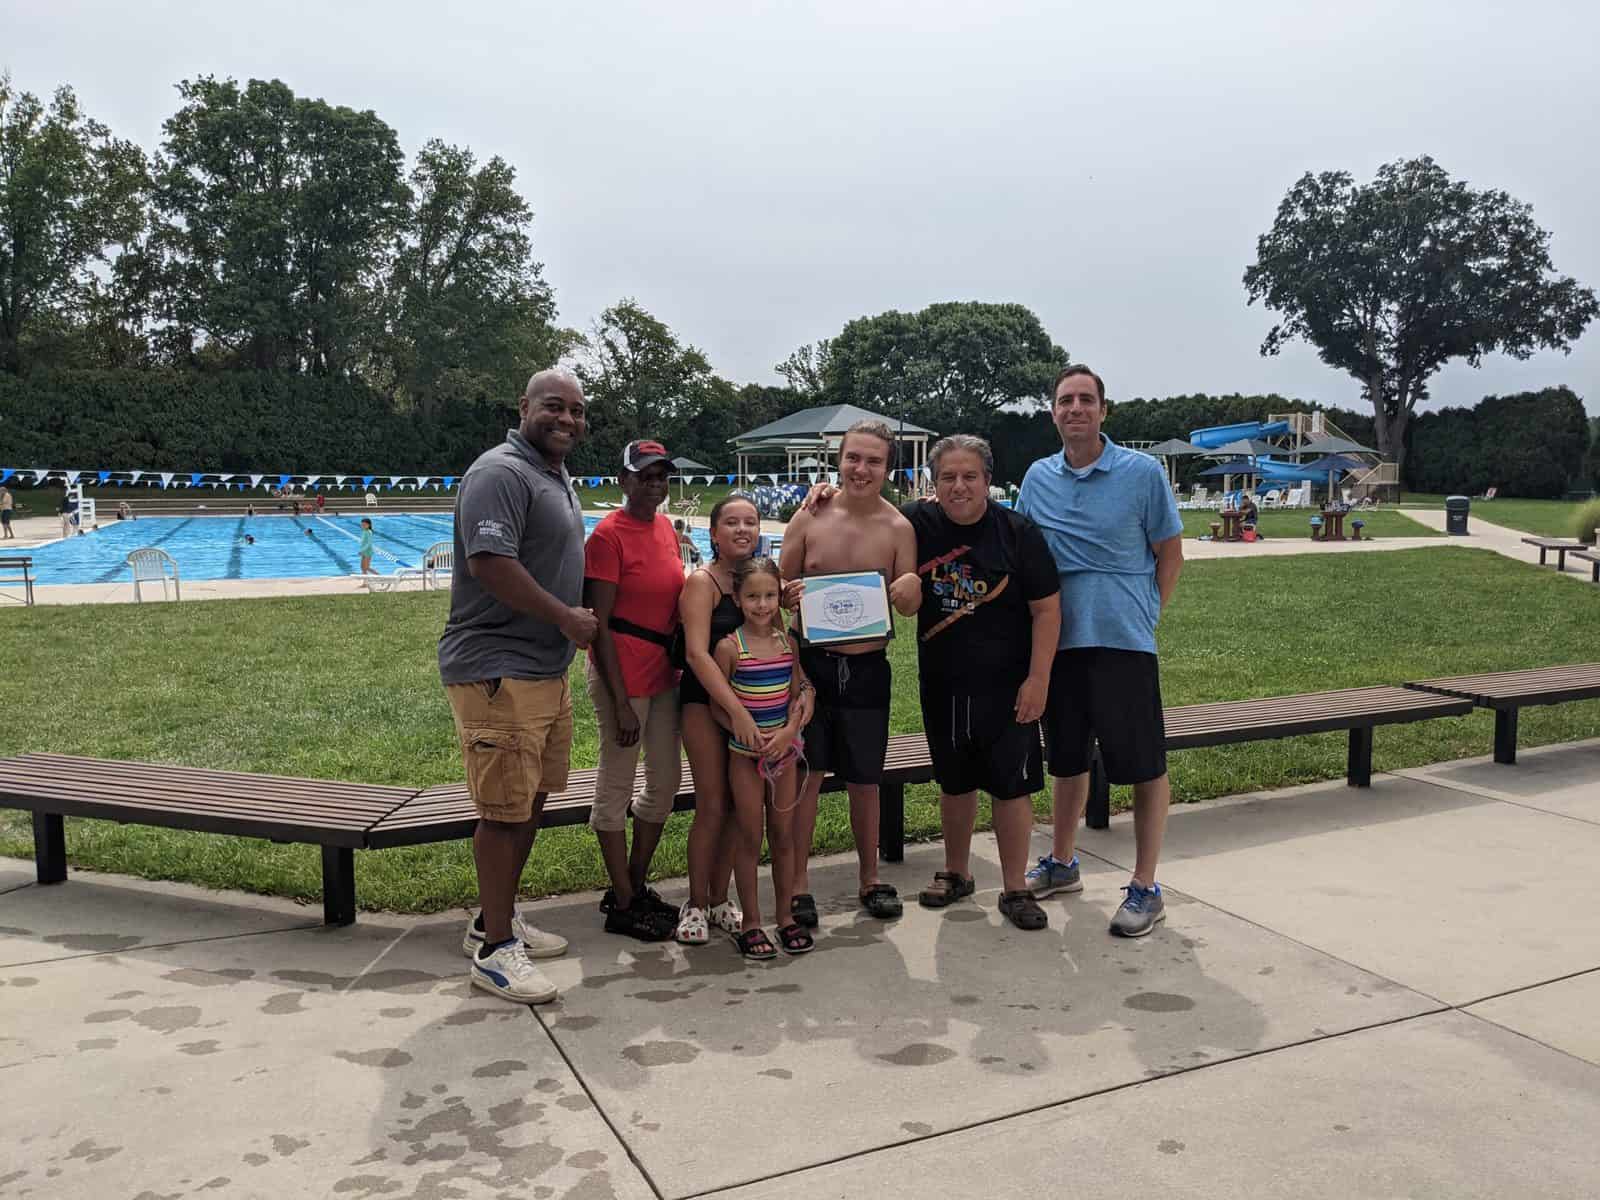 Photo: Princeton Recreation Department marks millionth visitor to Community Park Pool